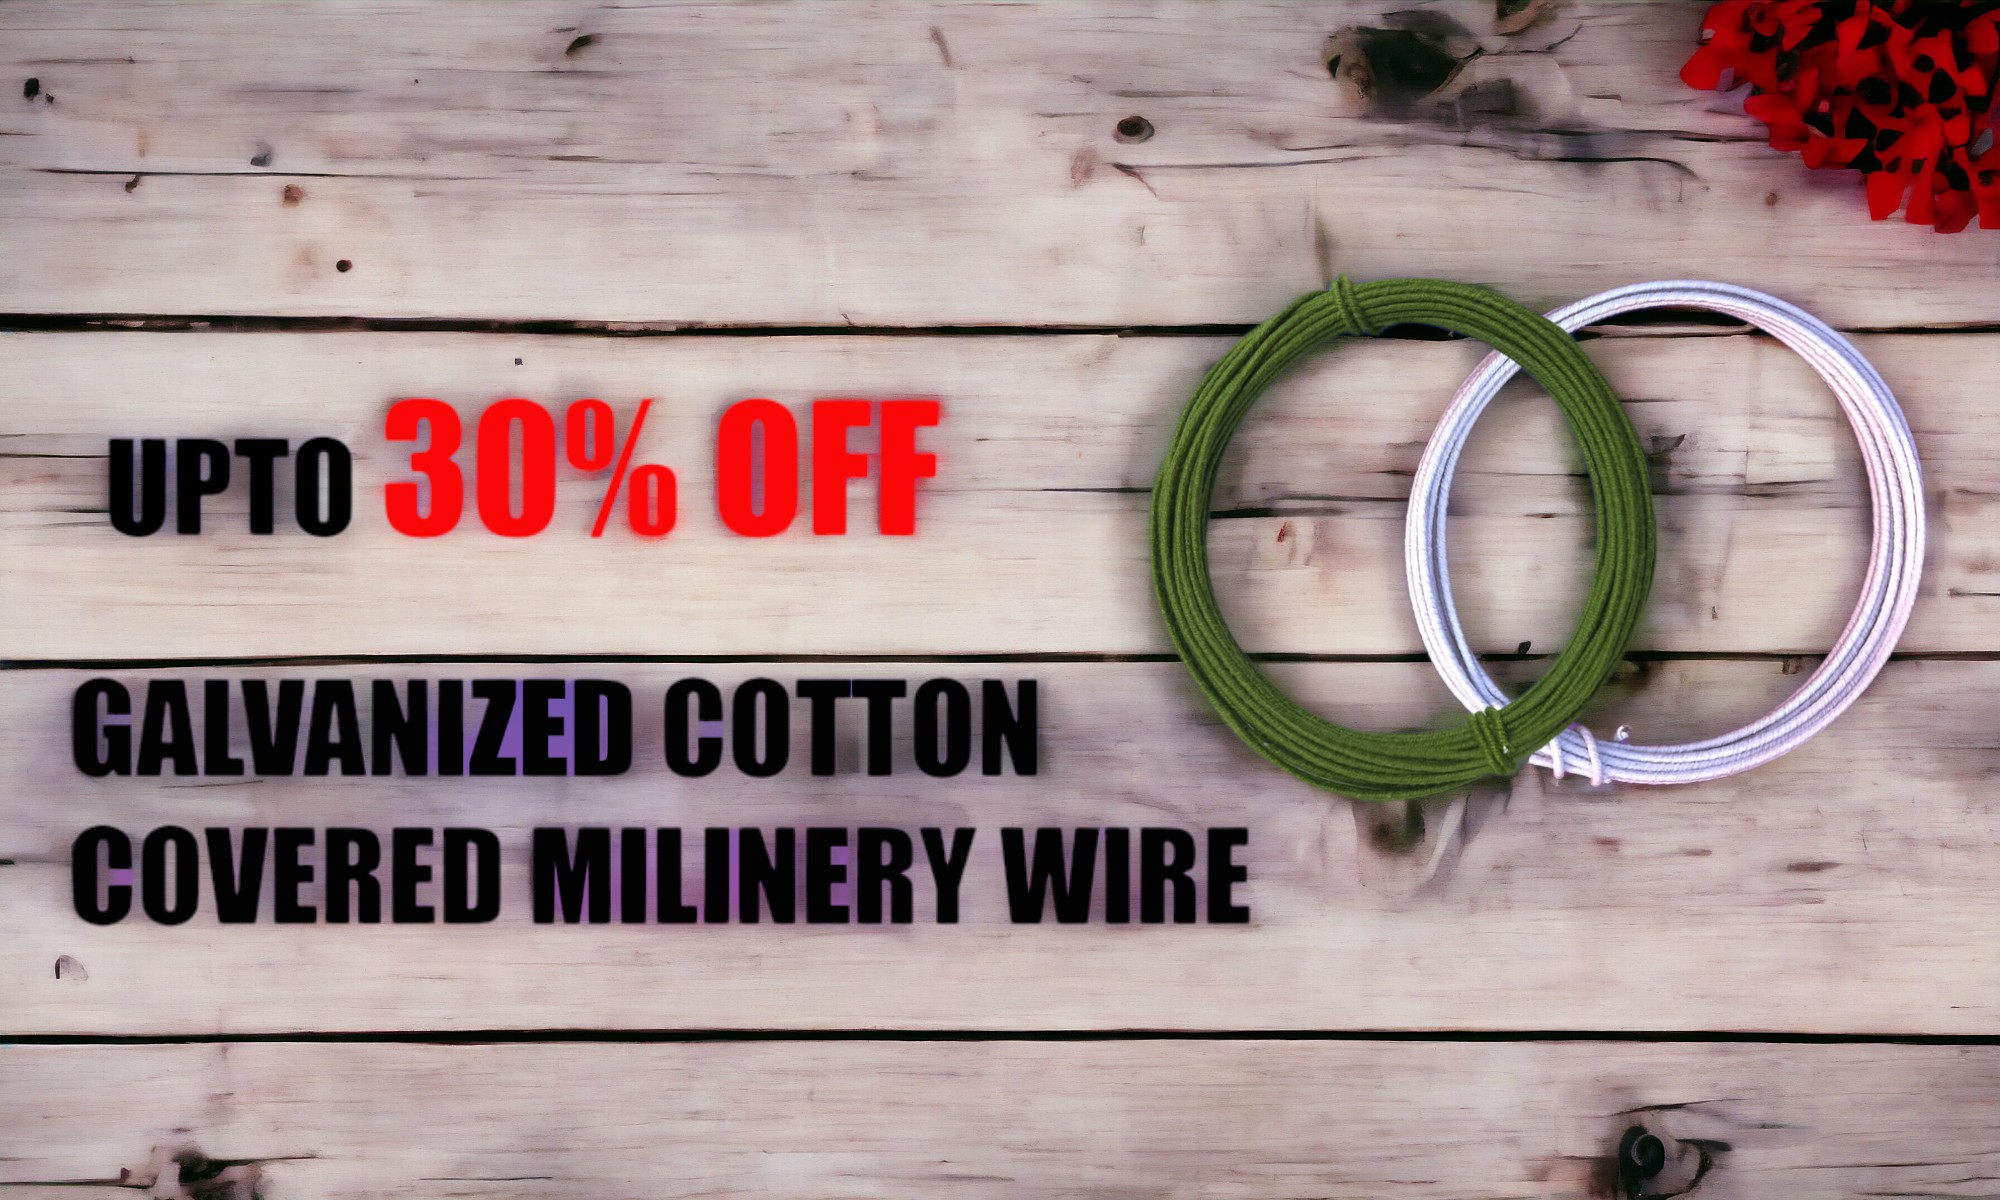 Cotton Covered Millinary Wire